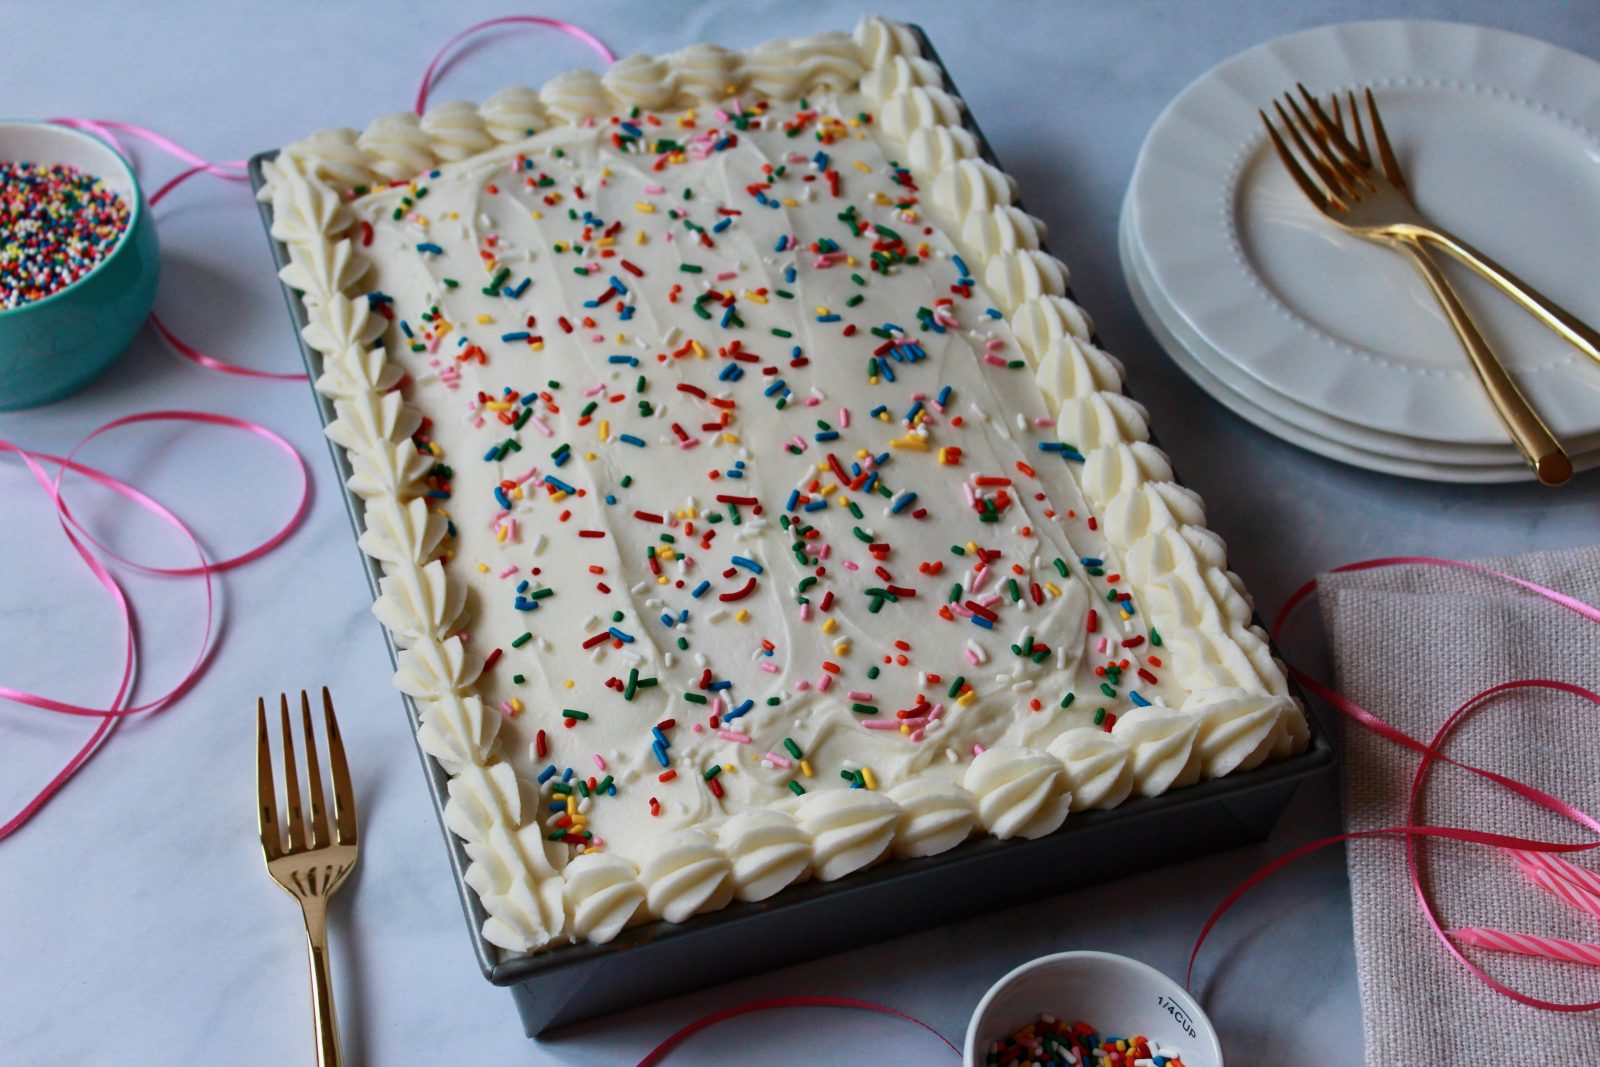 A horizontal oriented photo - looking down upon a sprinkle vanilla sheet cake.  The cake is in a rectangular metal pan and is uncut.  The cake is frosted in vanilla frosting with a piped border and topped with colorful sprinkles.  Around the cake are pink birthday candles, gold forks, white dessert plates, small bowls of sprinkles as well as thin pink ribbon and some strewn sprinkles.